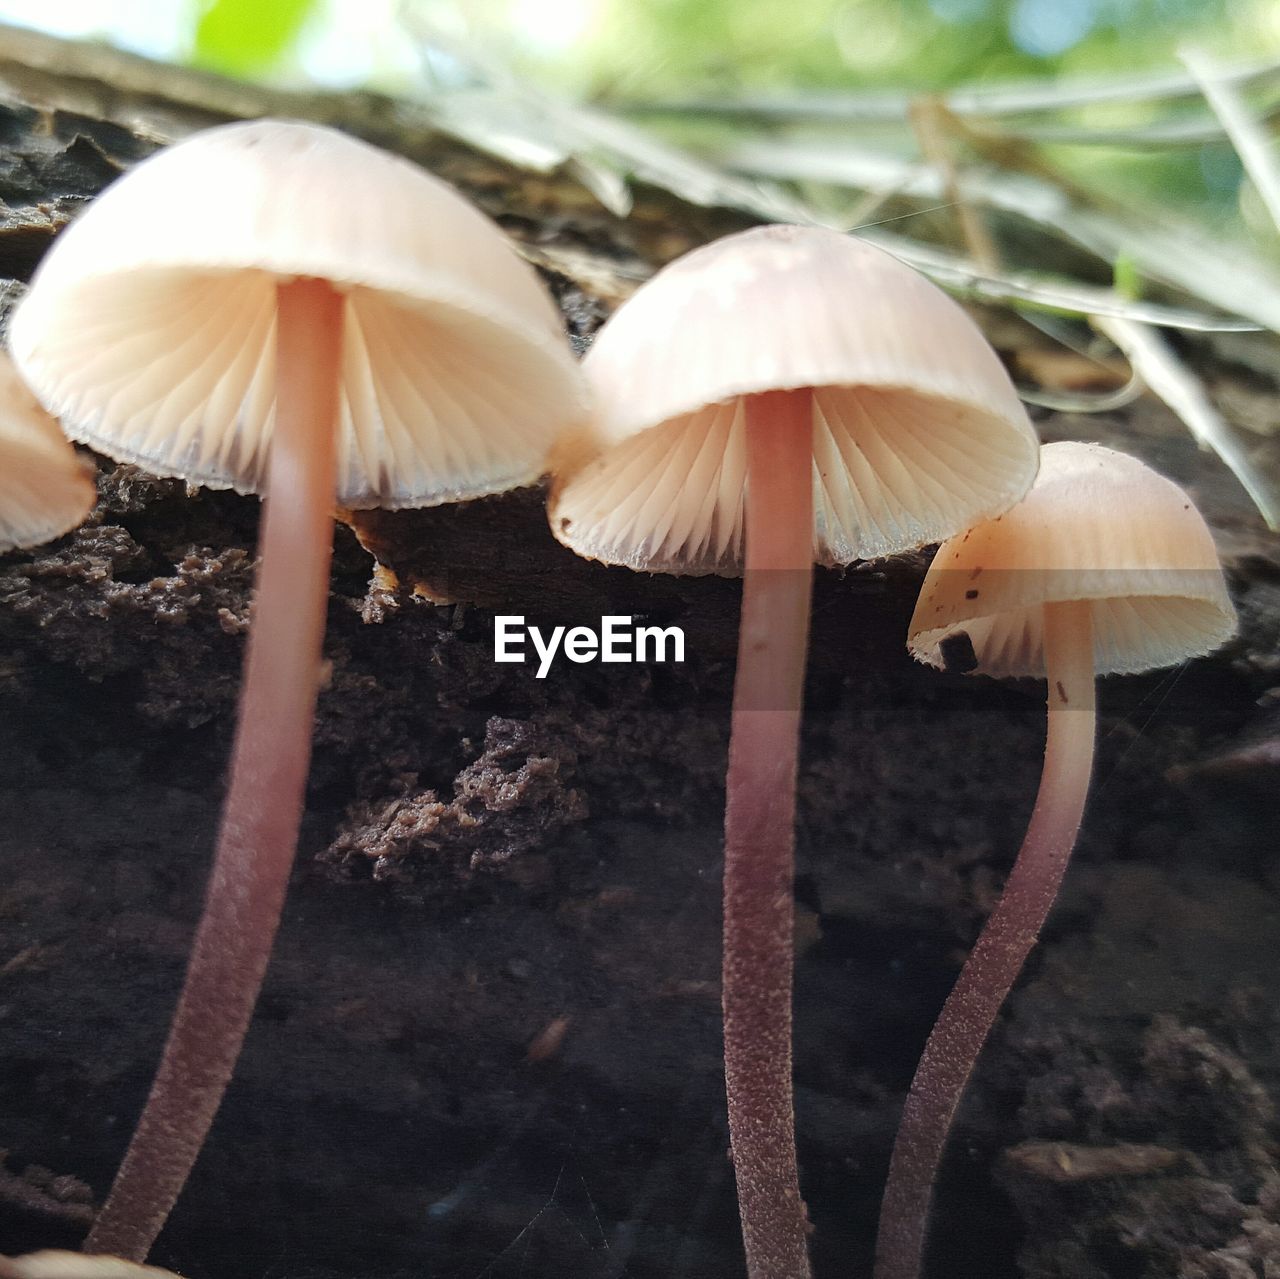 CLOSE-UP OF MUSHROOMS GROWING ON FOREST